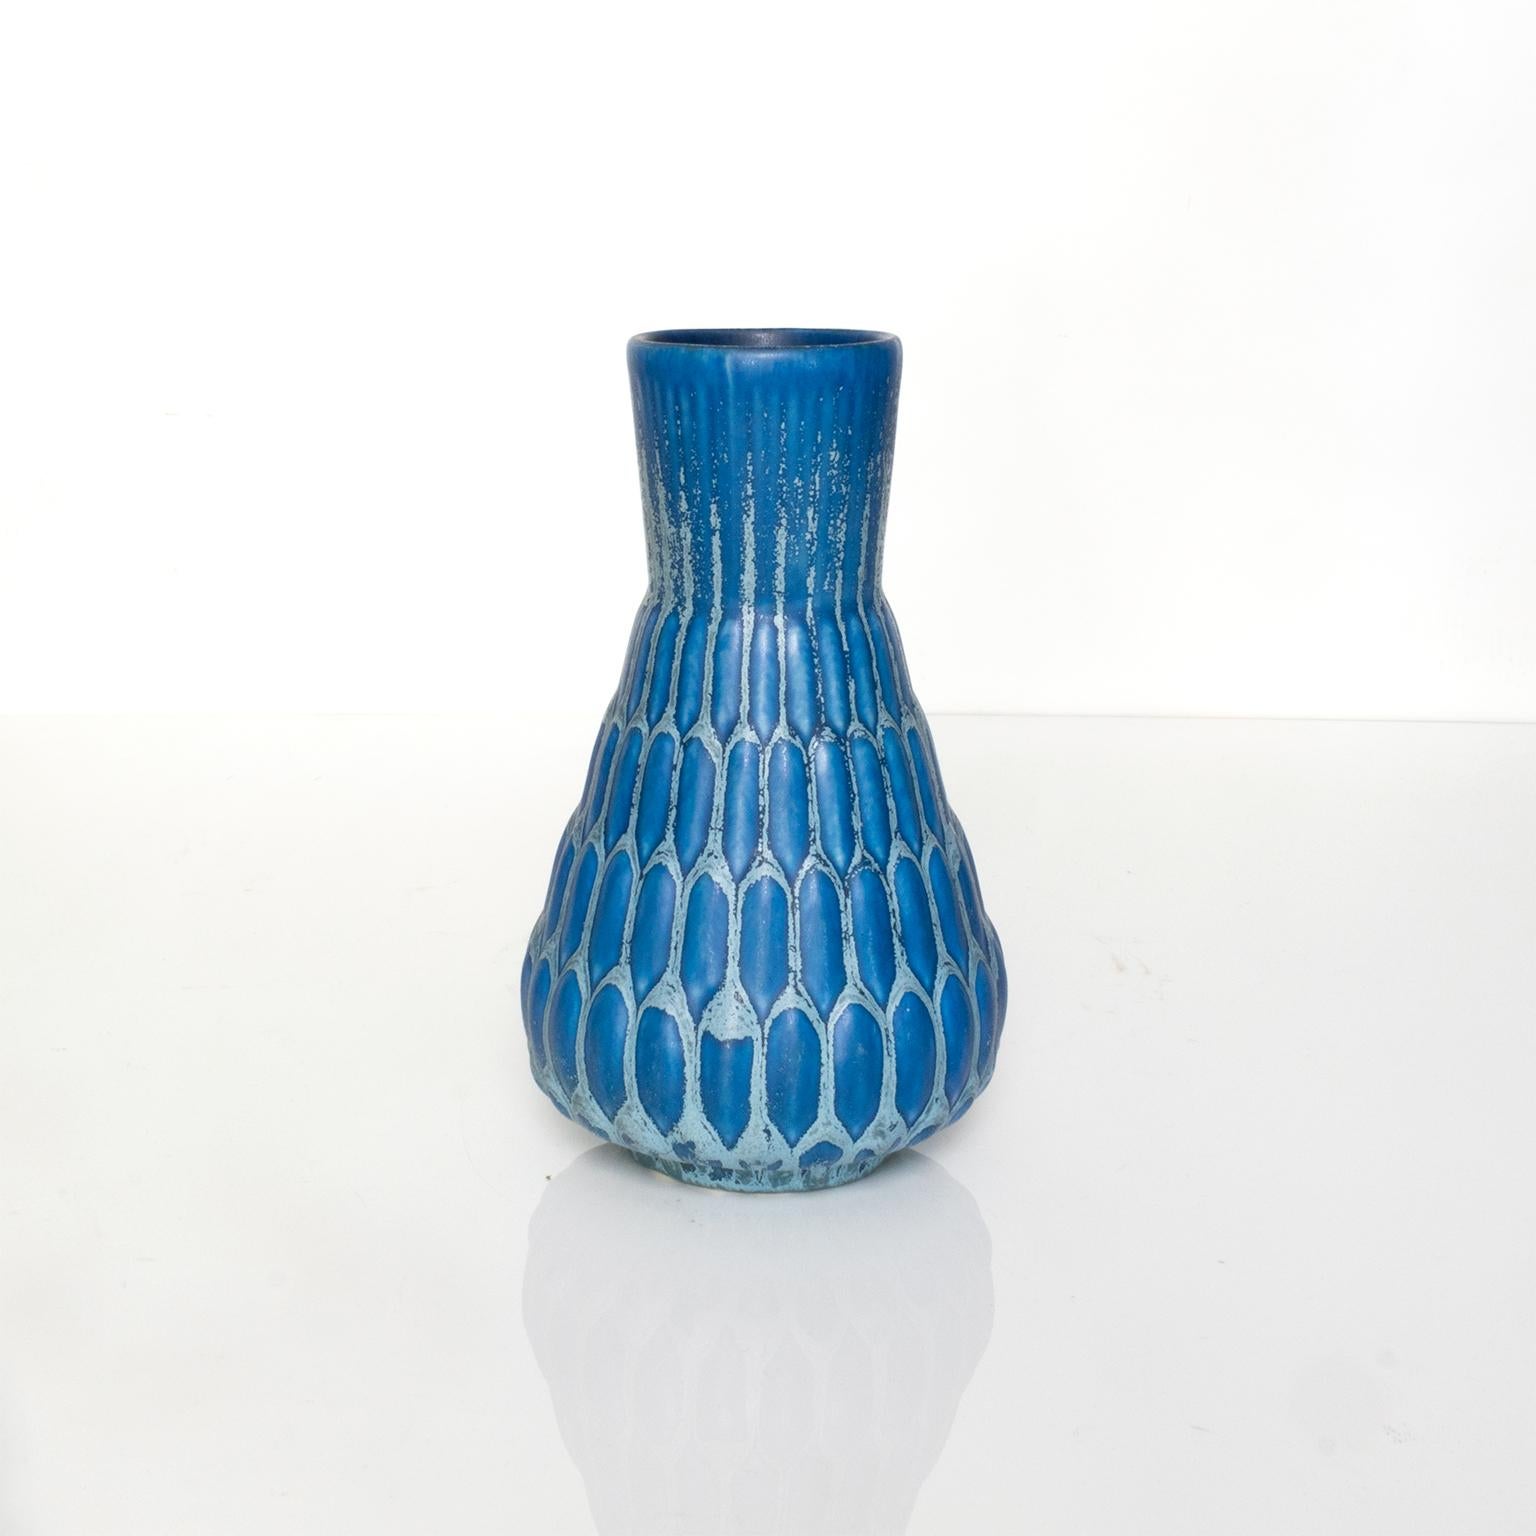 Ewald Dahlskog ceramic vase in blue glaze over a tapered form with a pod like pattern. Made at Bo Fajans, Sweden, circa 1940.

Measures: Height 8.25“, diameter 4.5“.